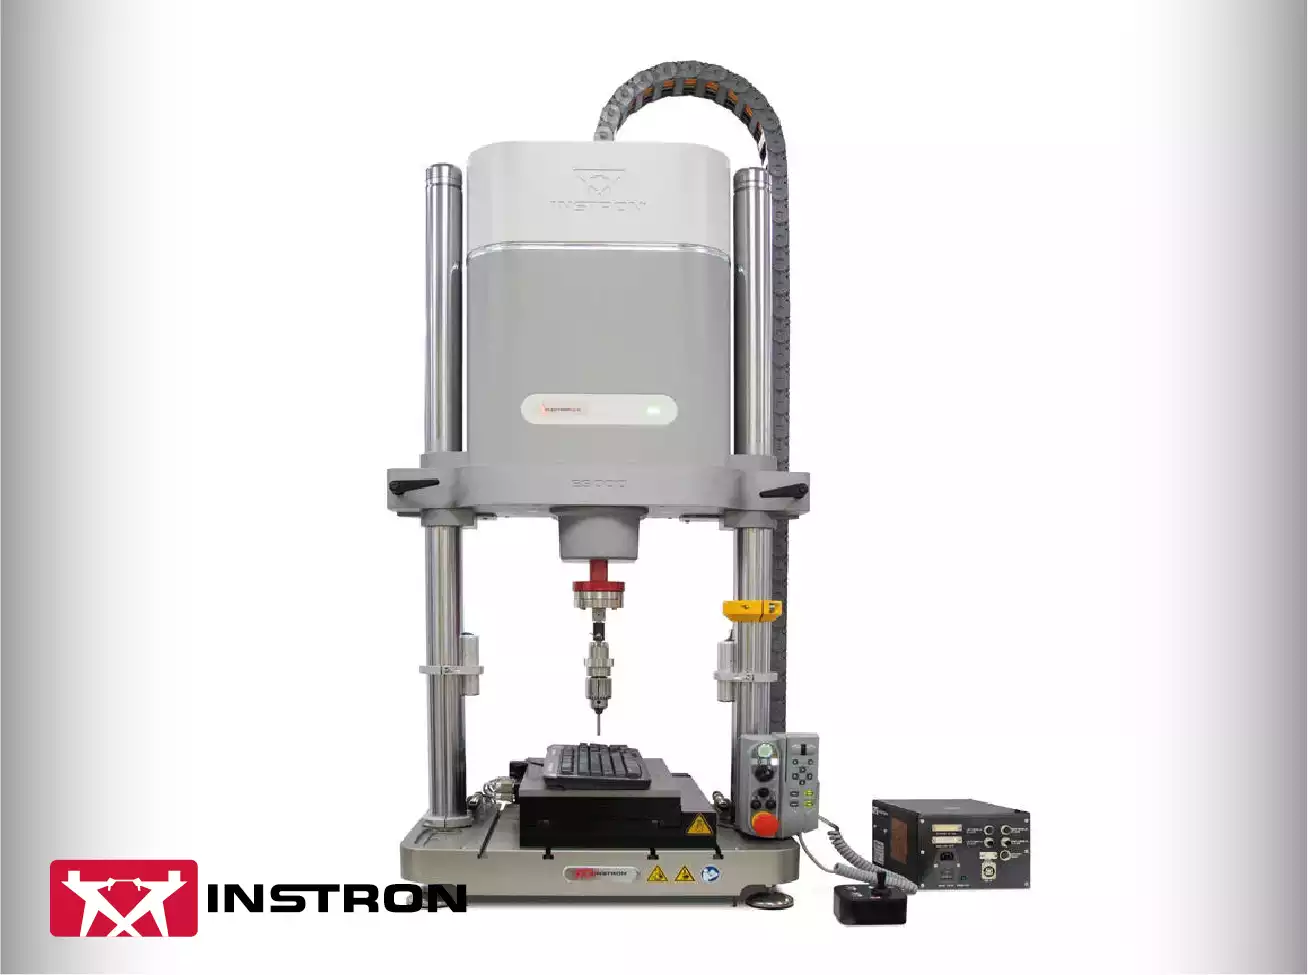 Instron ElectroPuls® Automated XY Stage